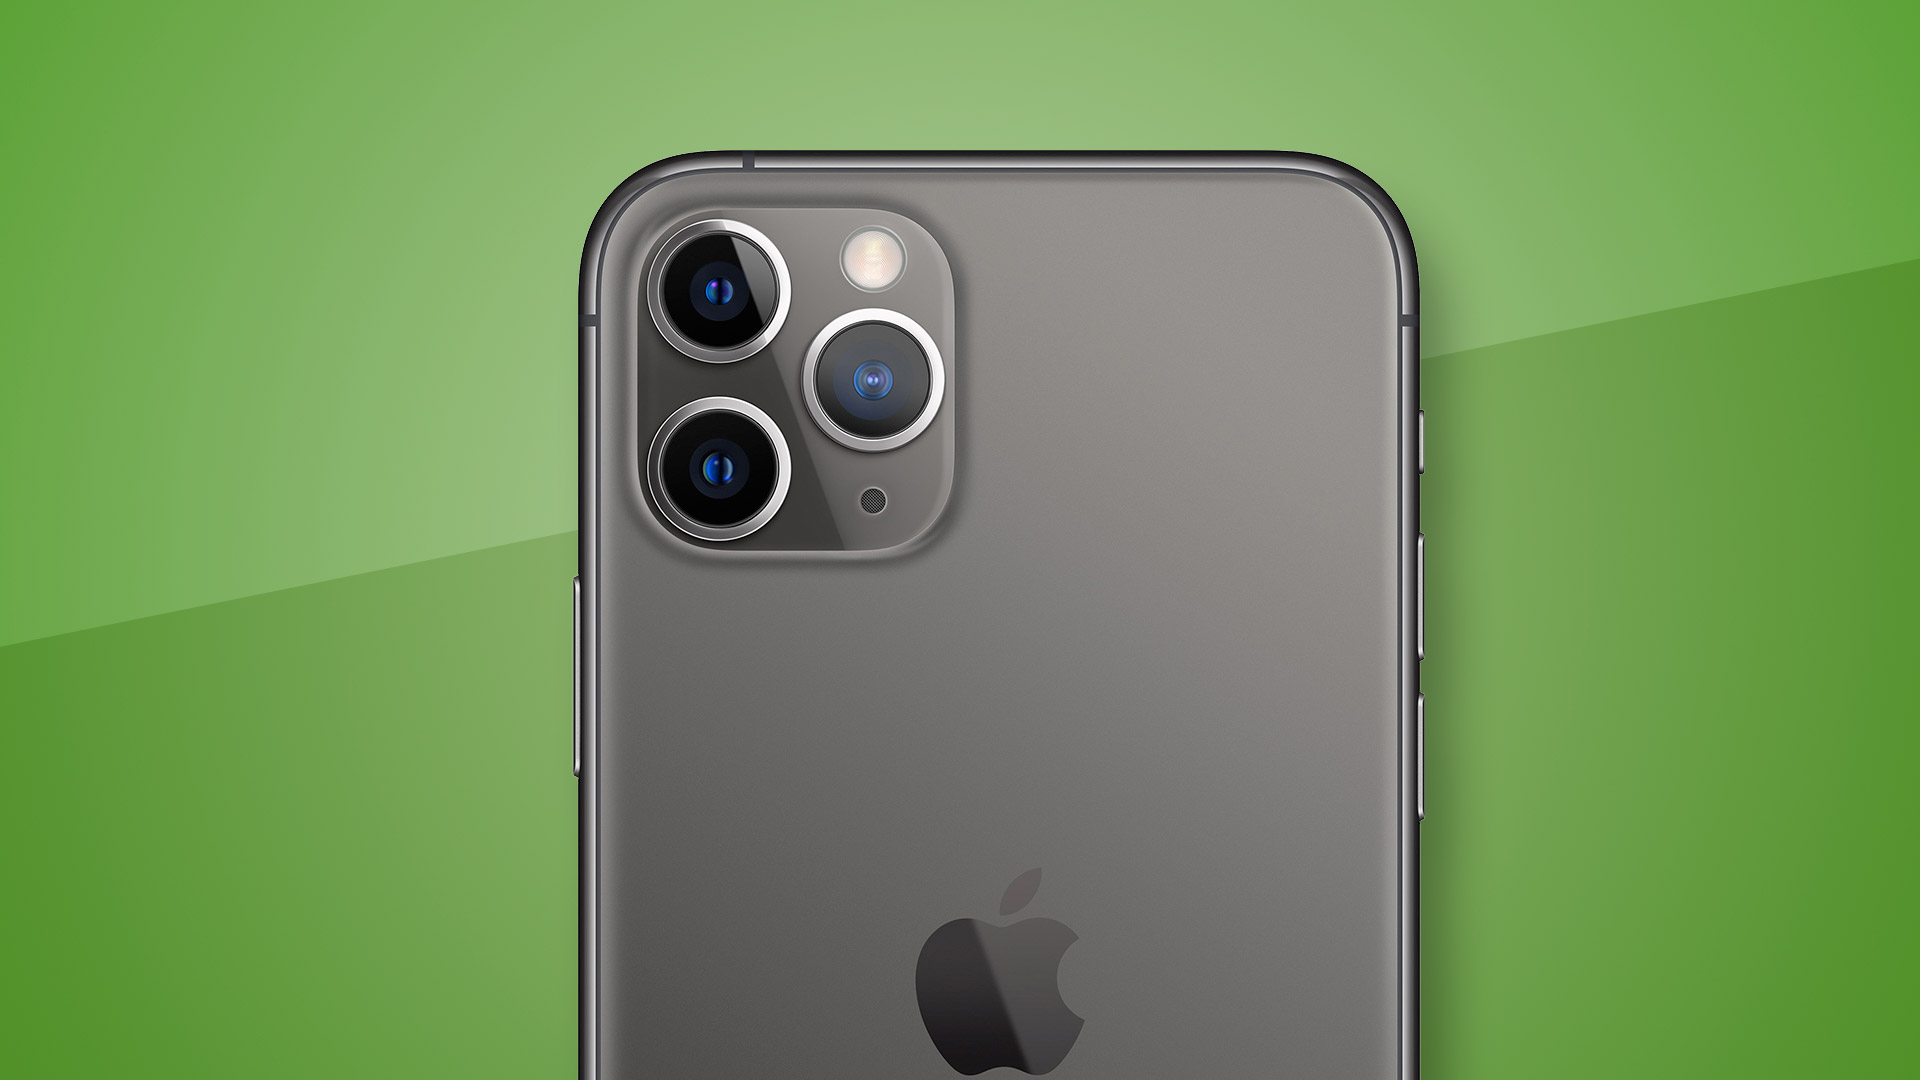 New Leaked Iphone 12 Camera Could Bring Big Upgrades To Portrait Mode Techradar